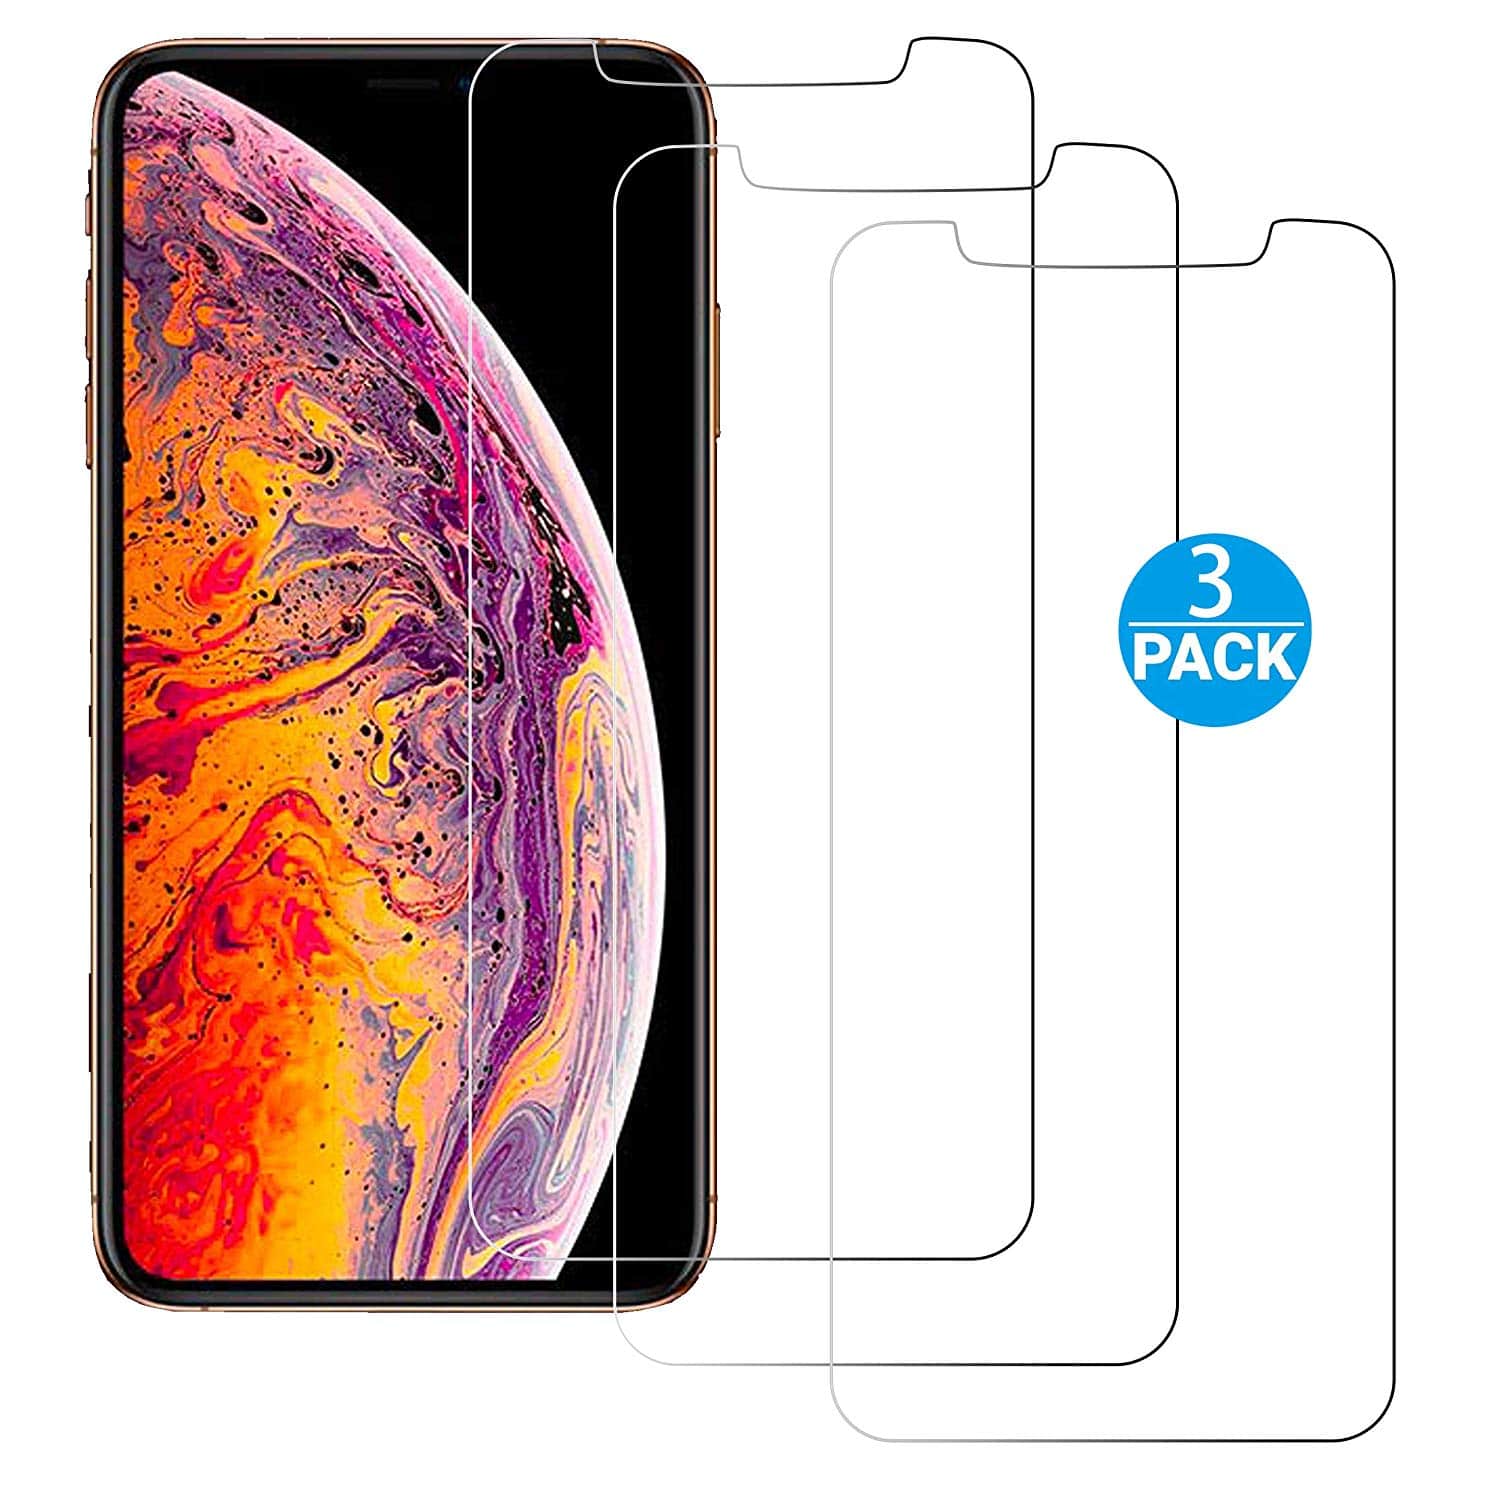 Ailun for Apple iPhone 11 Pro Max/iPhone Xs Max Screen Protector 3 Pack 6.5 Inch 2019/2018 Release Tempered Glass 0.33mm Anti Scratch Advanced HD Clarity Work with Most Case